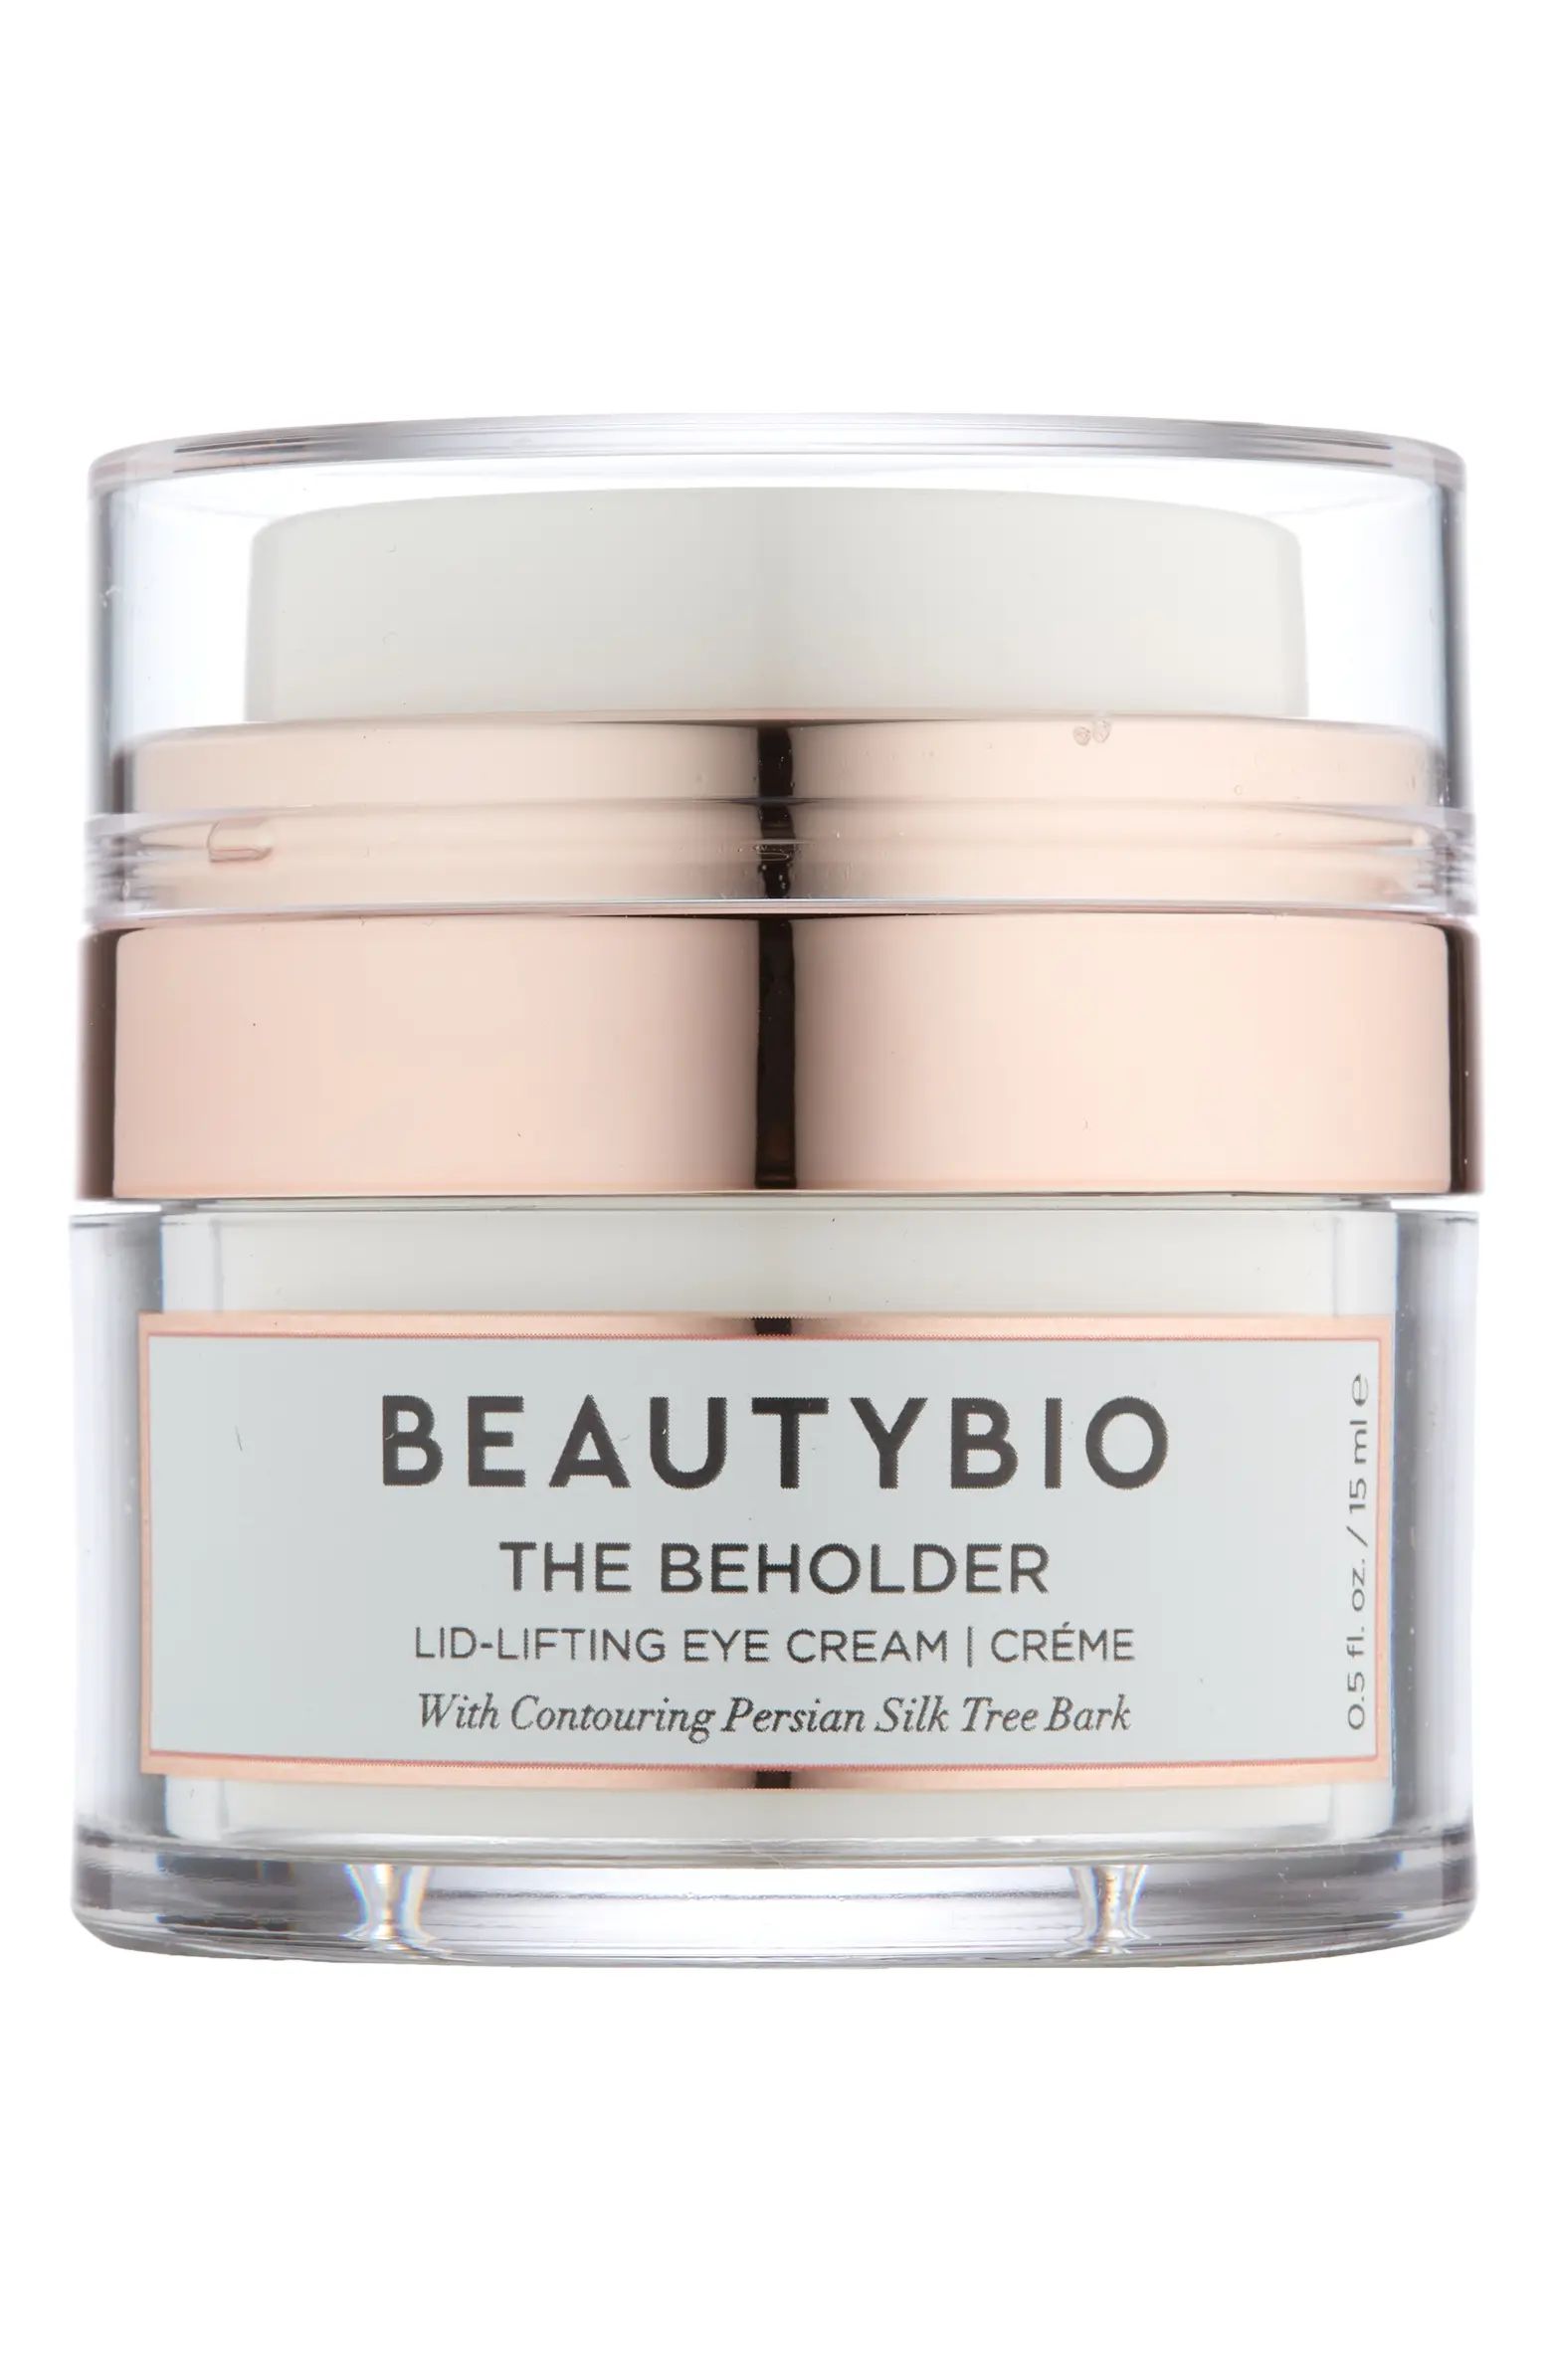 Rating 3.9out of5stars(35)35The Beholder Lifting Eye & Lid CreamBEAUTYBIO | Nordstrom